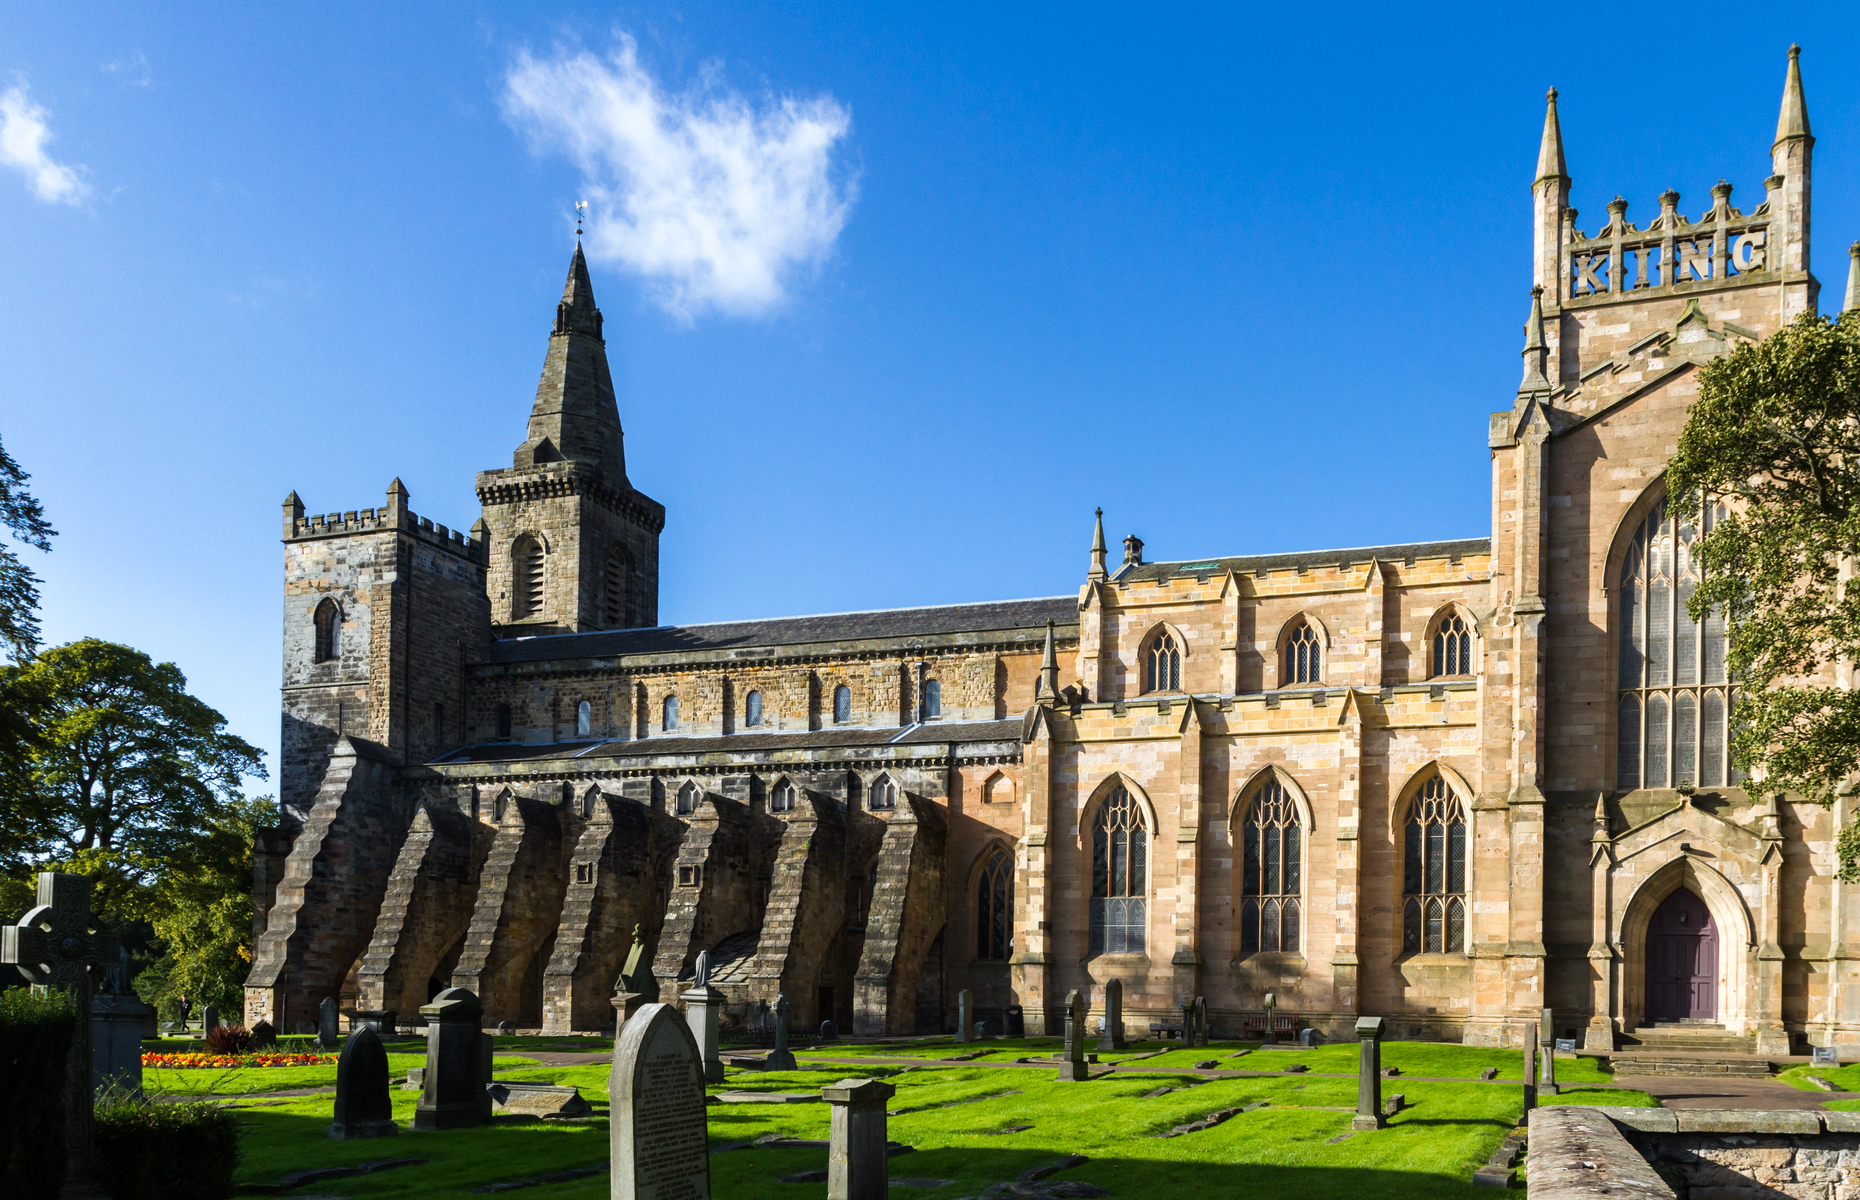 Dunfermline Abbey (image: Nature's Charm/Shutterstock)